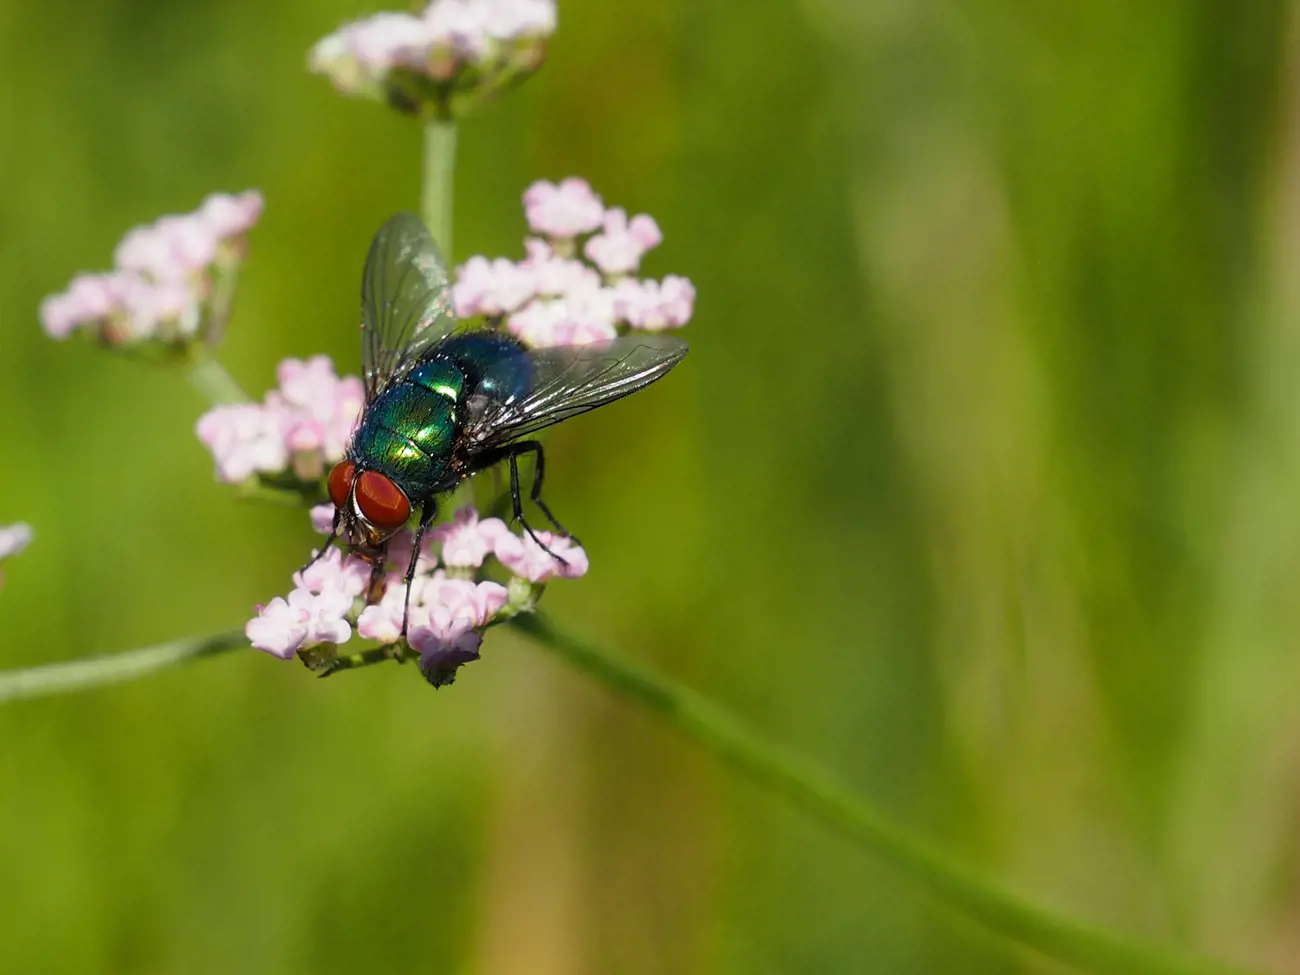 A fly sitting on the leaf of a plant in a field